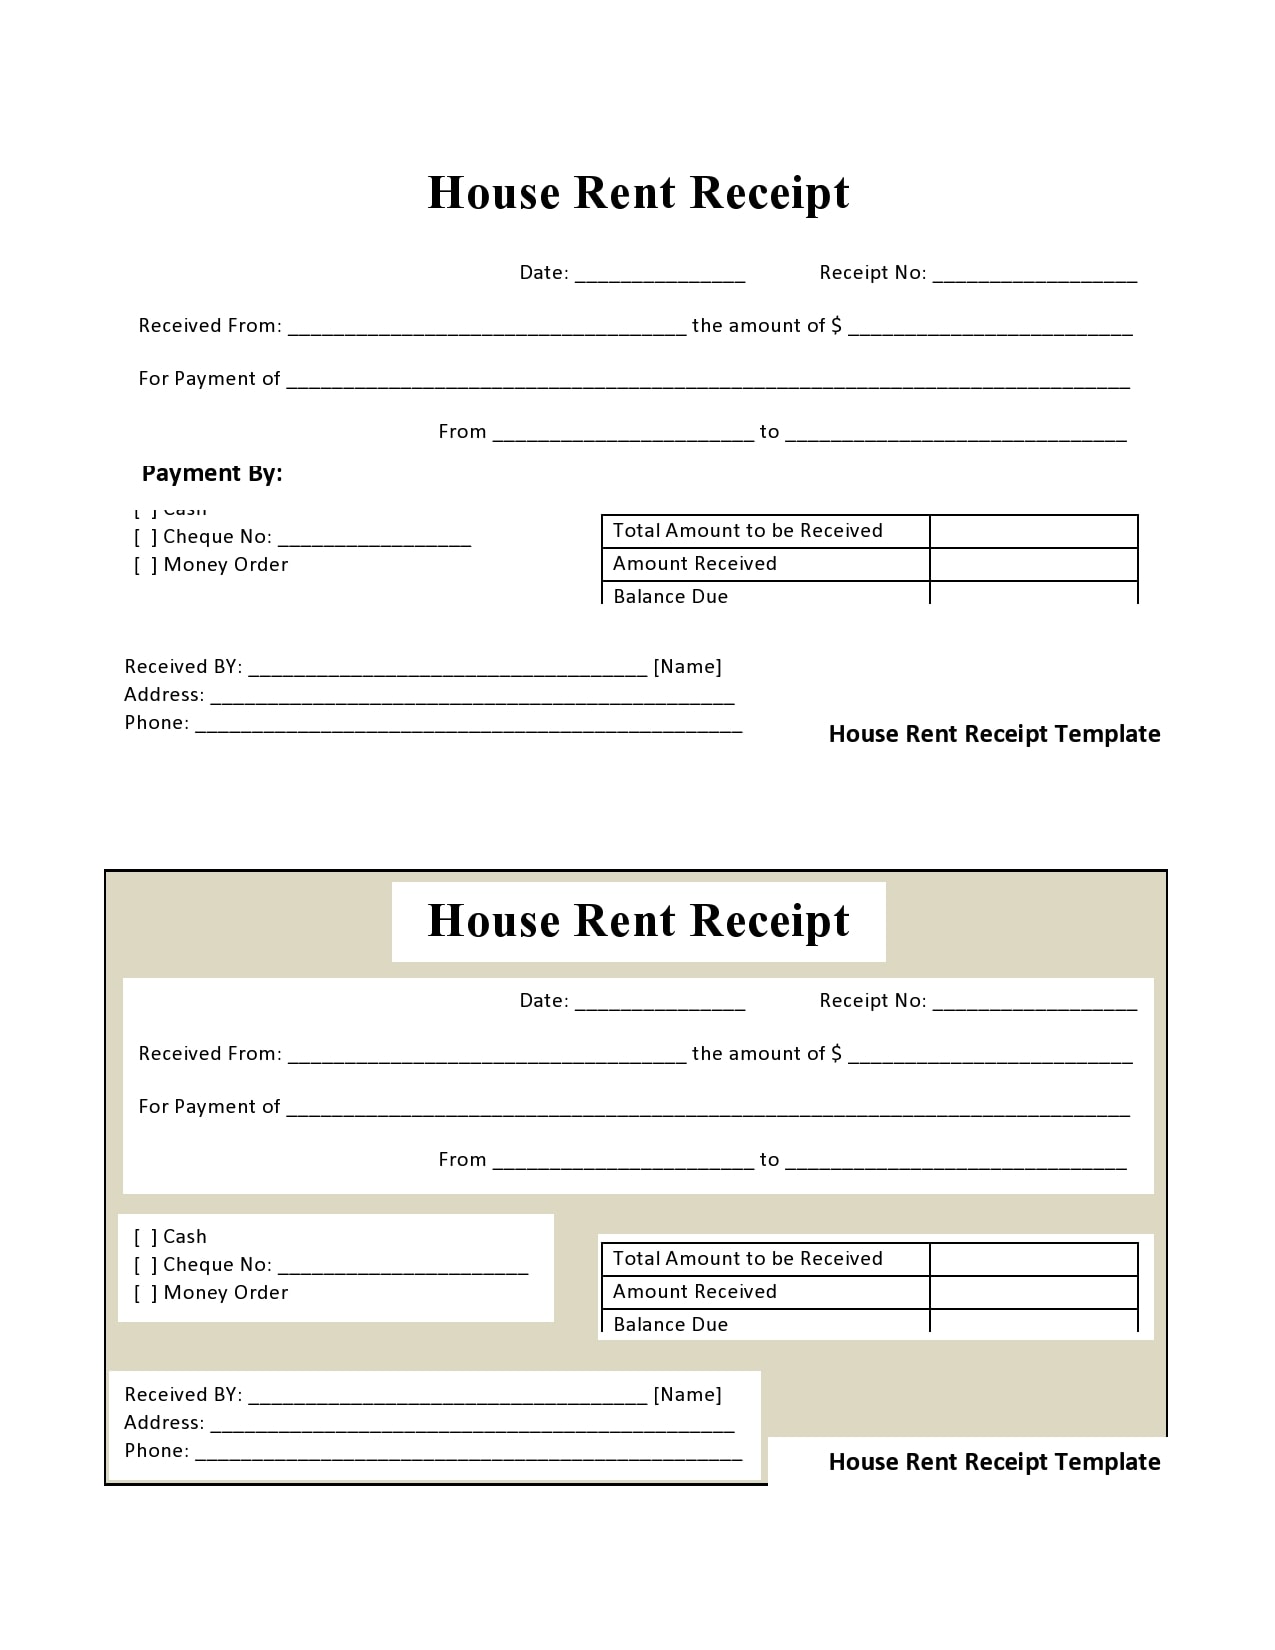 house rent receipt for income tax pdf